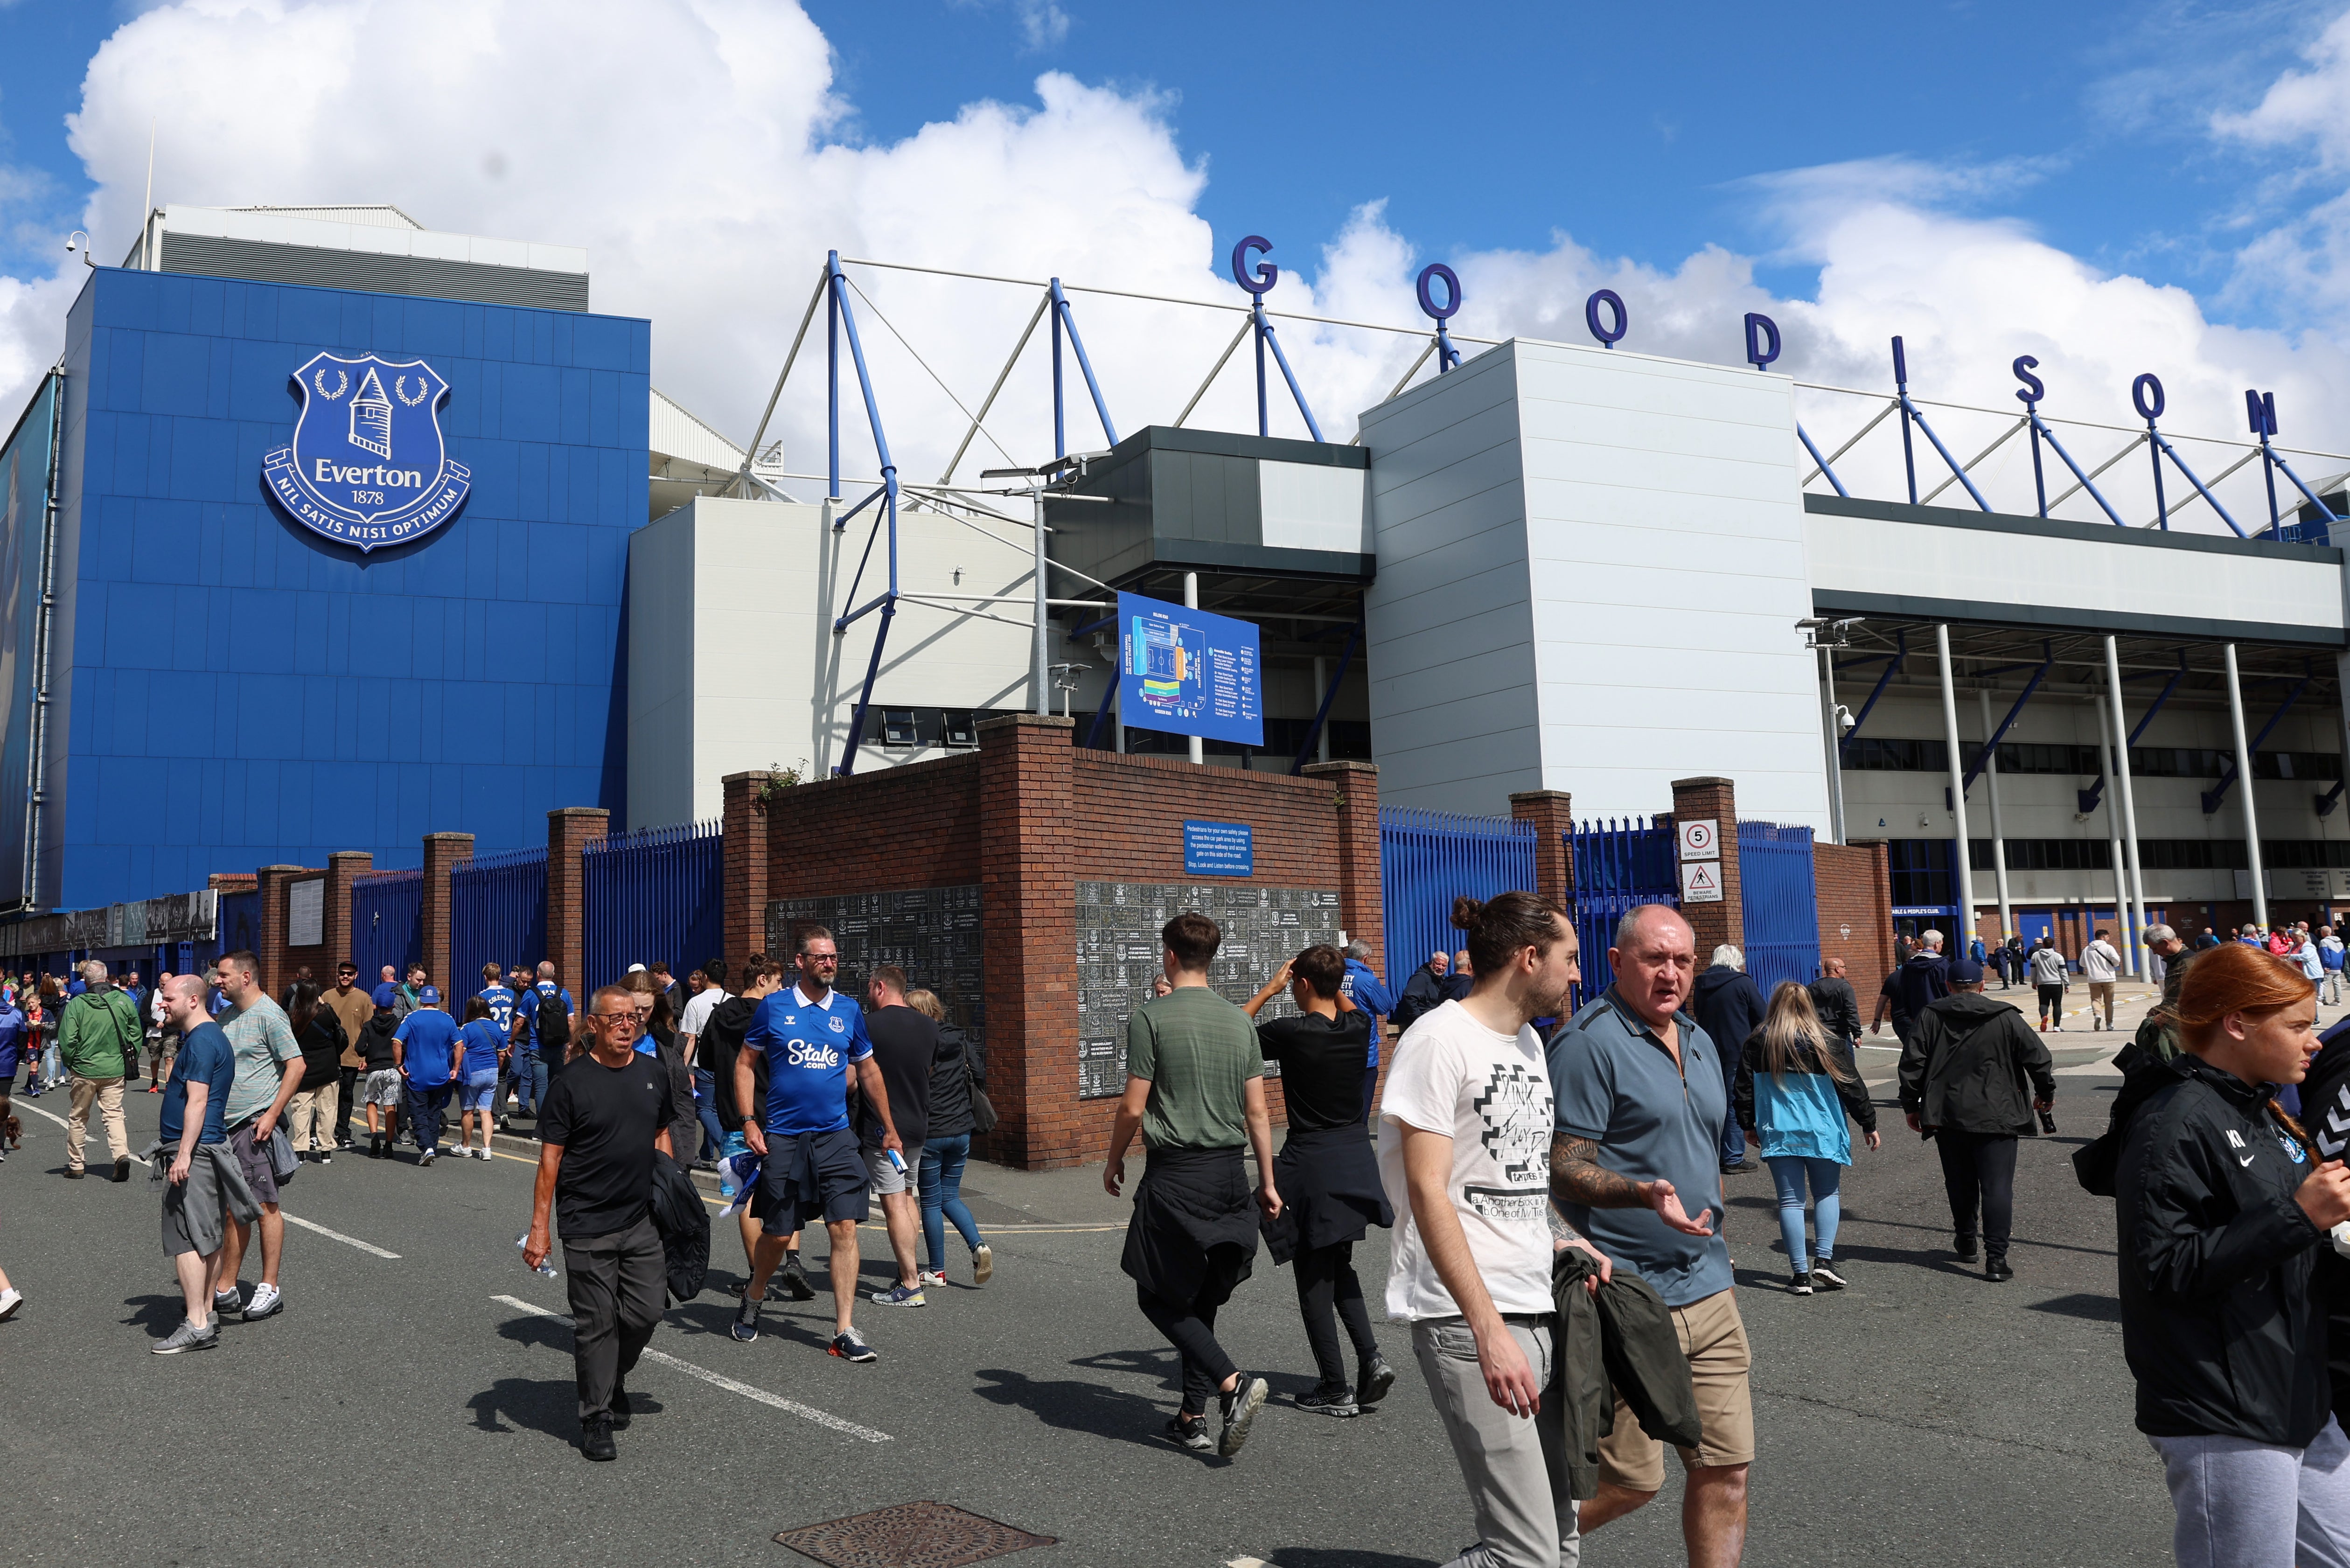 Everton plan to relocate away from Goodison Park with the help of new investment to build a stadium at Bramley-Moore Dock